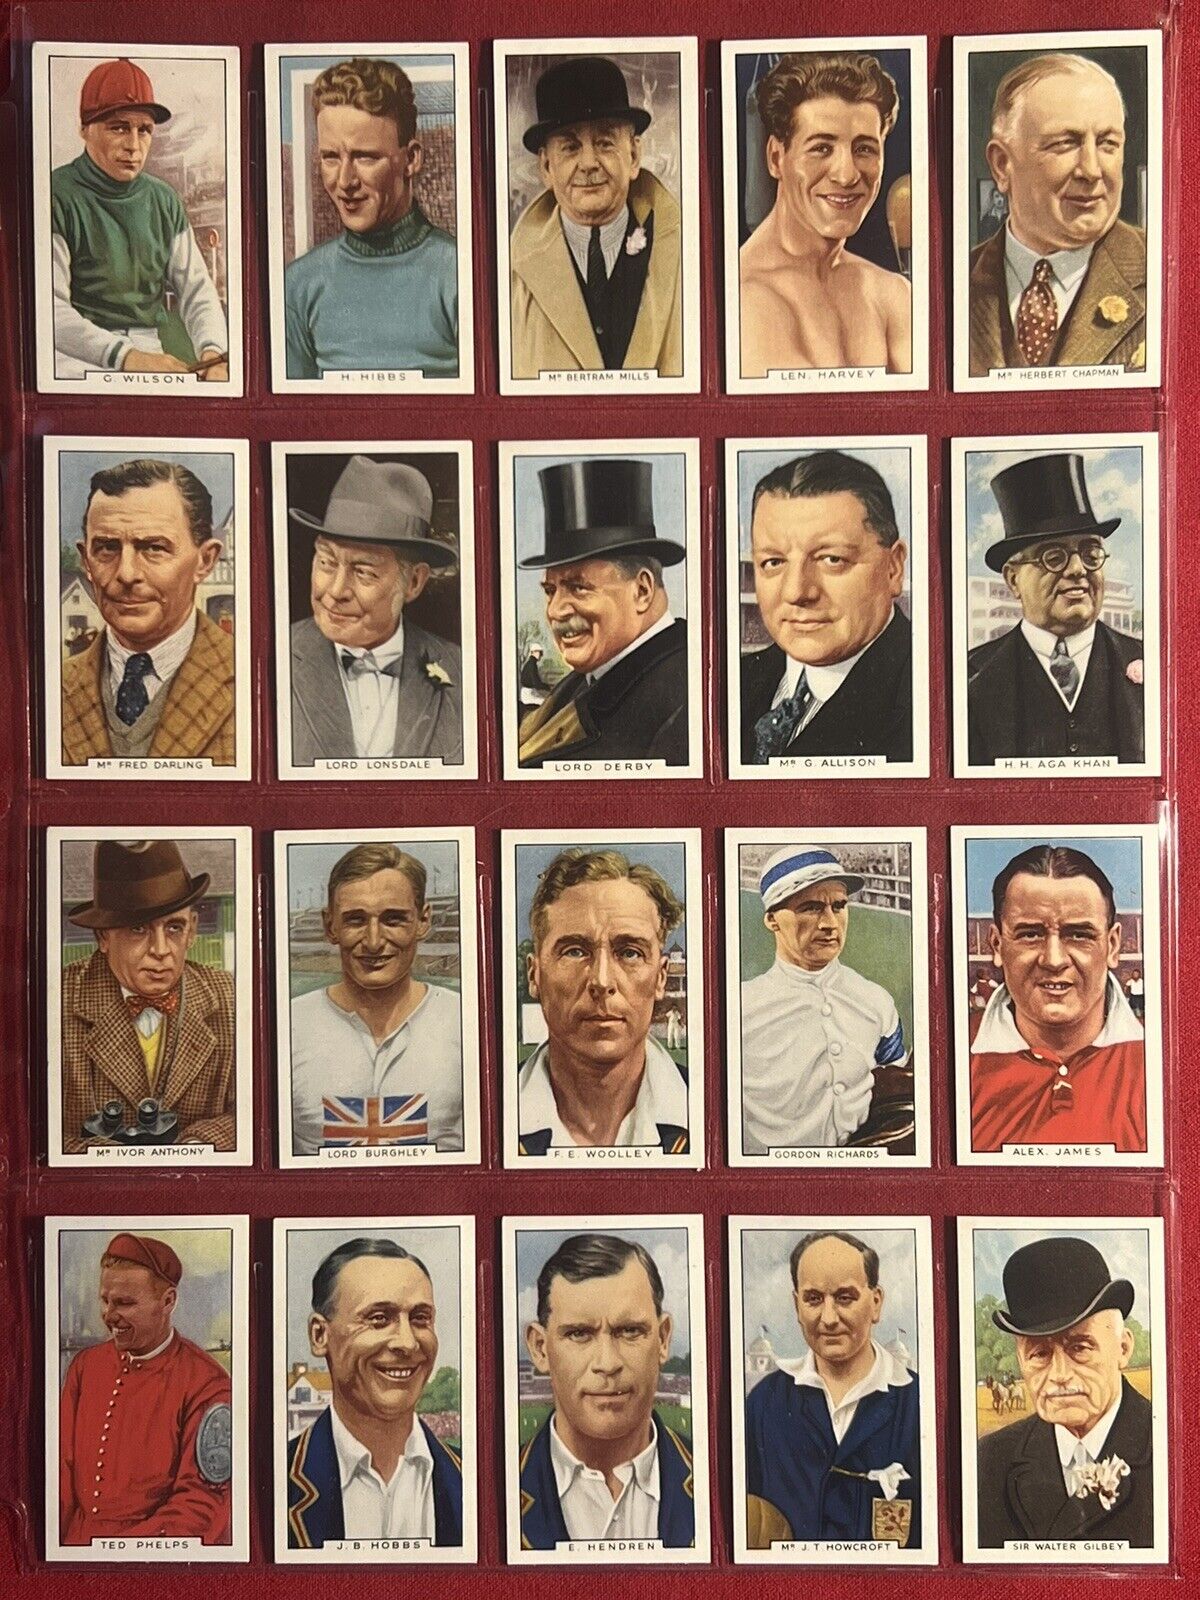 1936 GALLAHER SPORTING PERSONALITIES-FULL 48 CARD SET-DIXIE DEAN-VG+EXCELLENT+